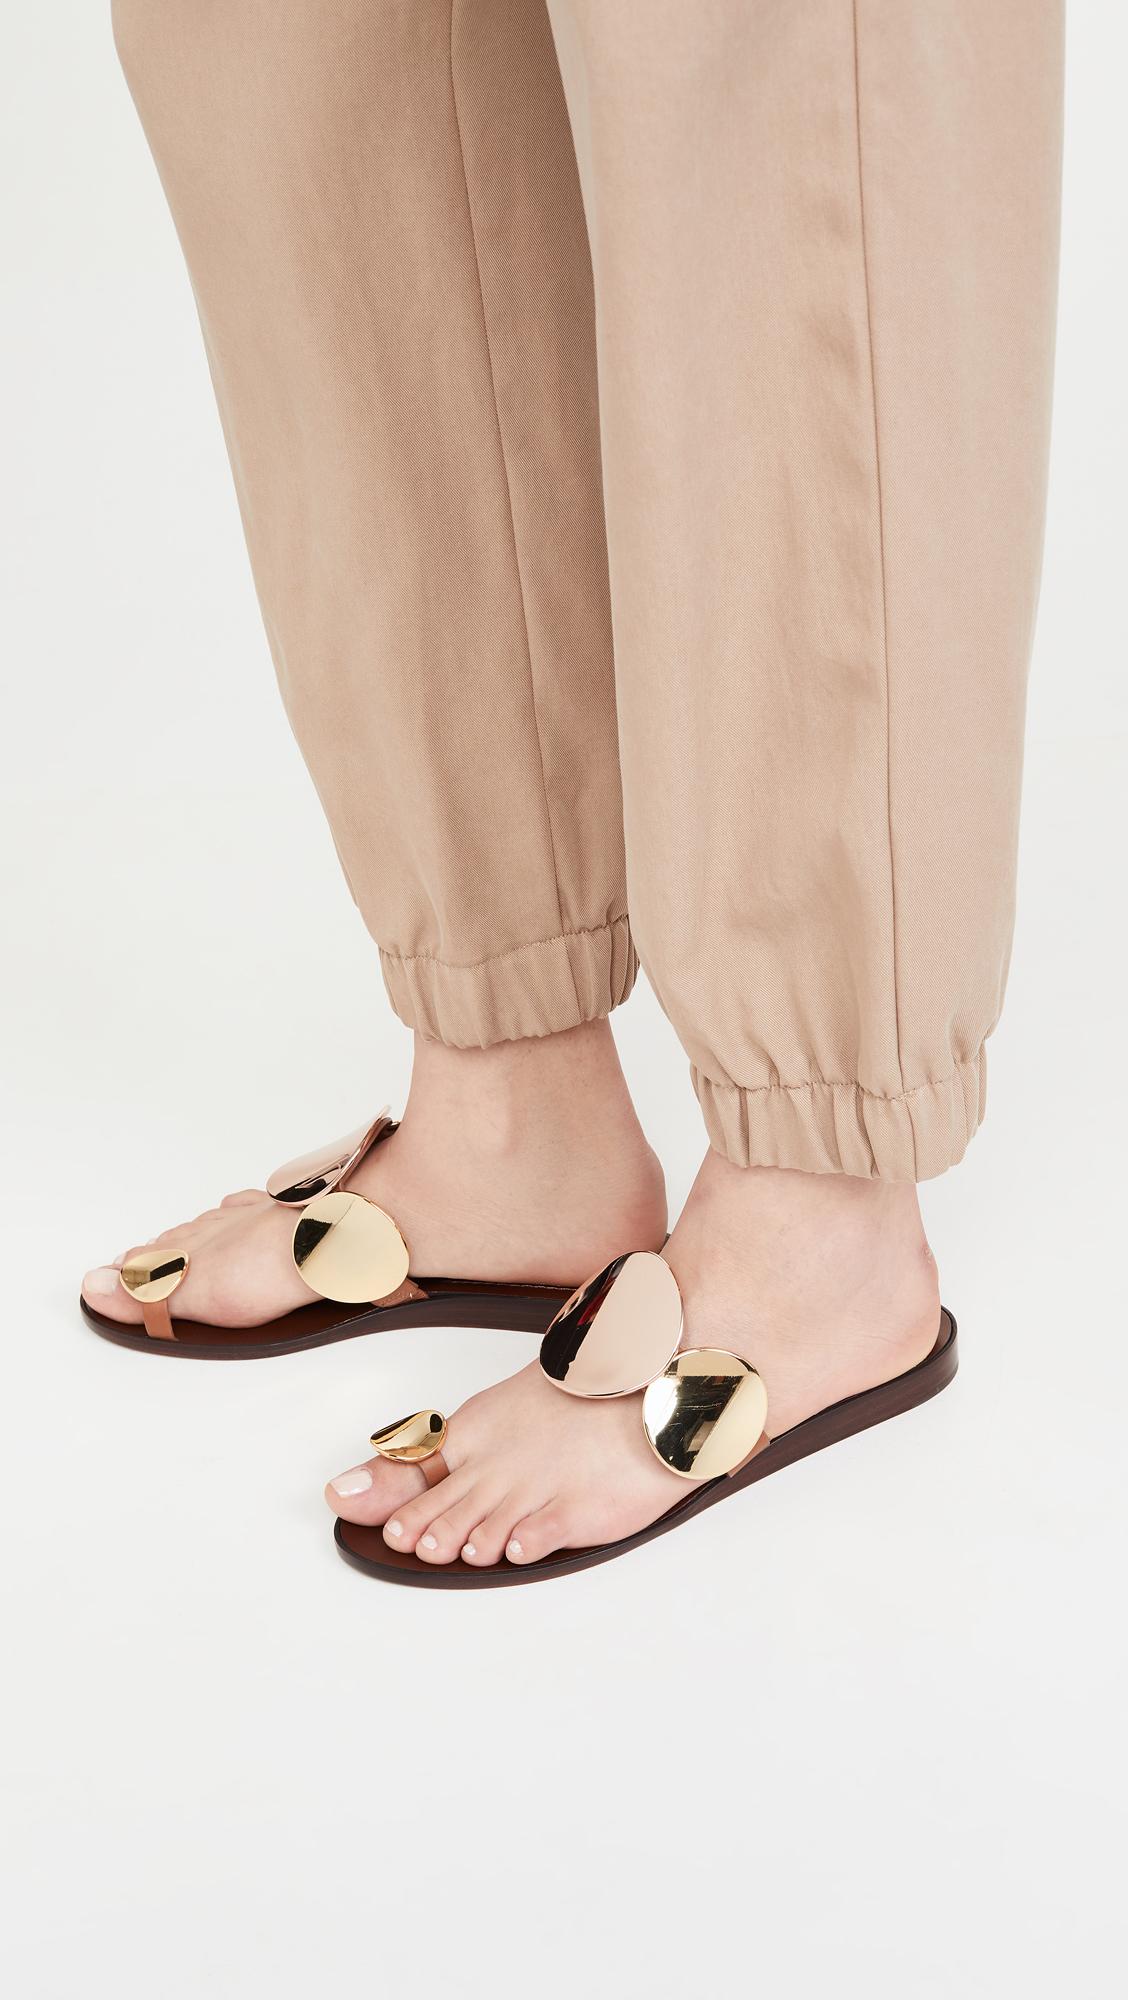 Tory Burch Leather Patos Multi Disk Sandals in Brown - Lyst